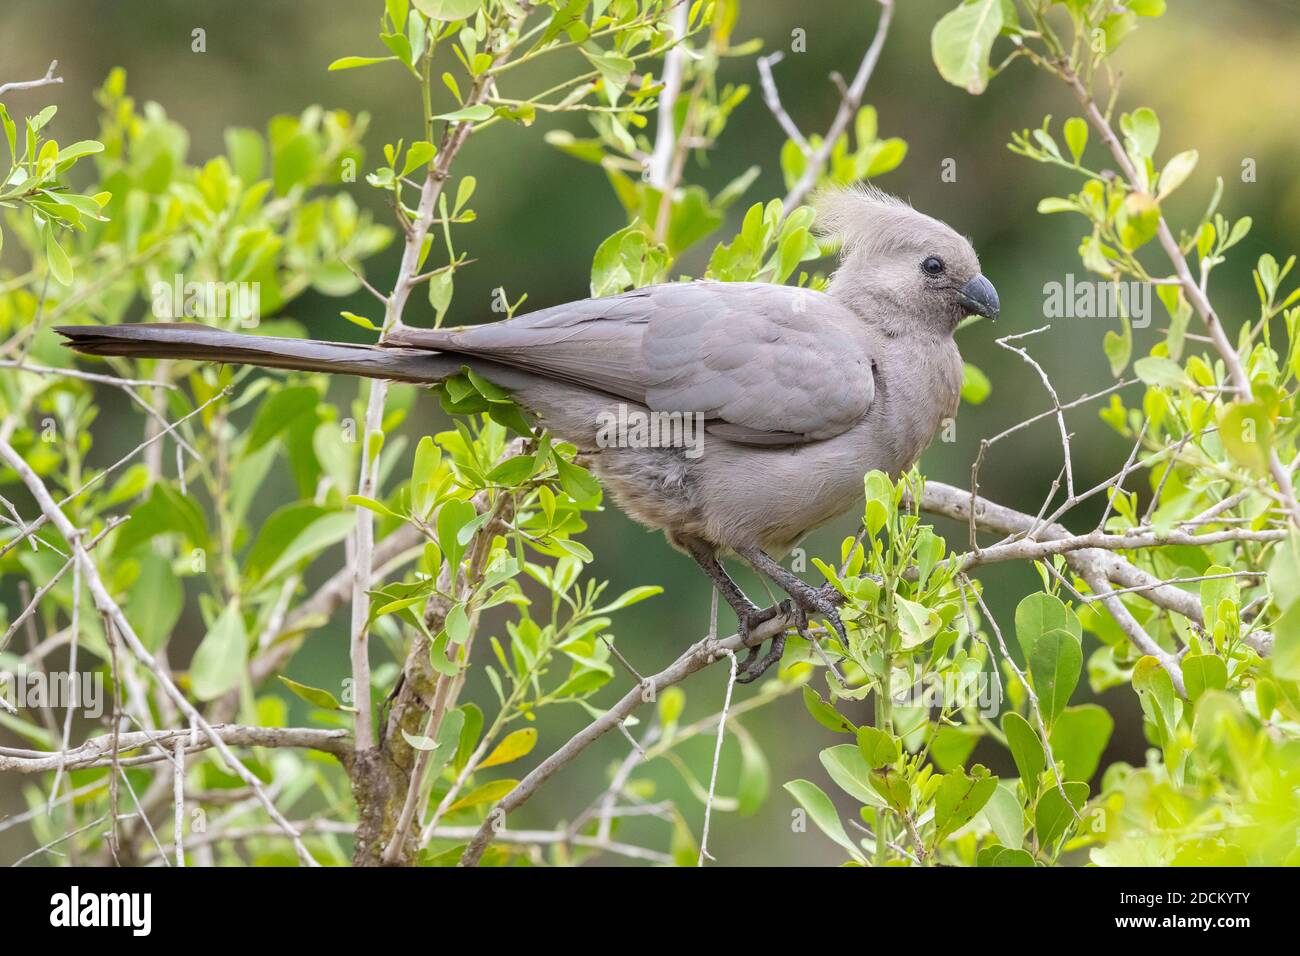 Greay Go-away-bird (Corythaixoides concolor bechuanae), side view of an adult perched on a branch, Mpumalanga, South Africa Stock Photo